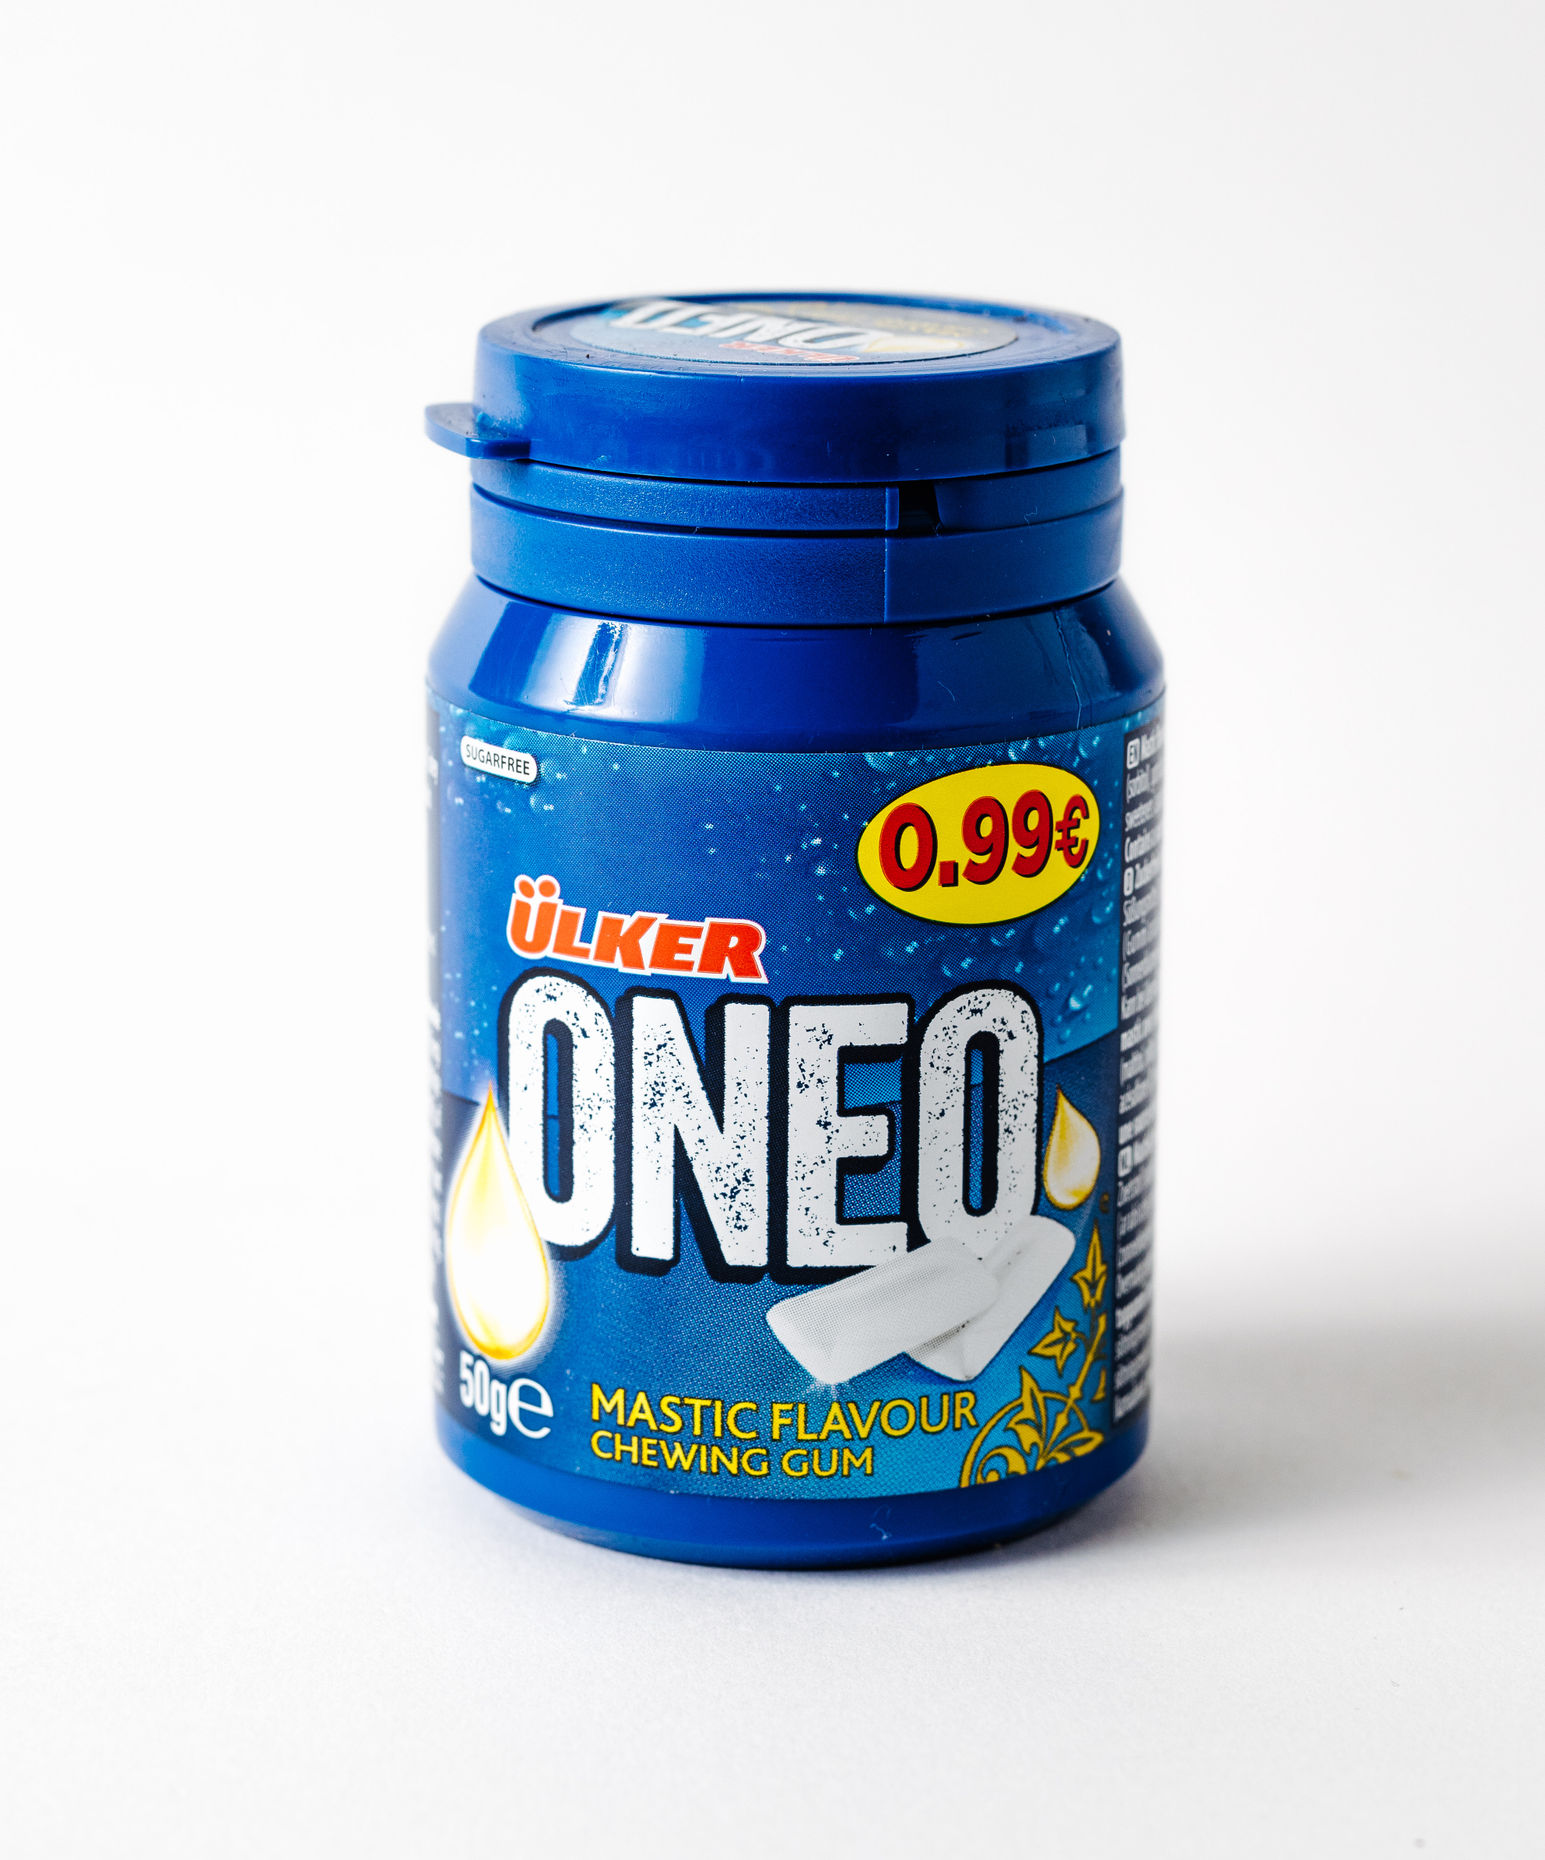 Oneo Mastic Flavored Chewing Gum 